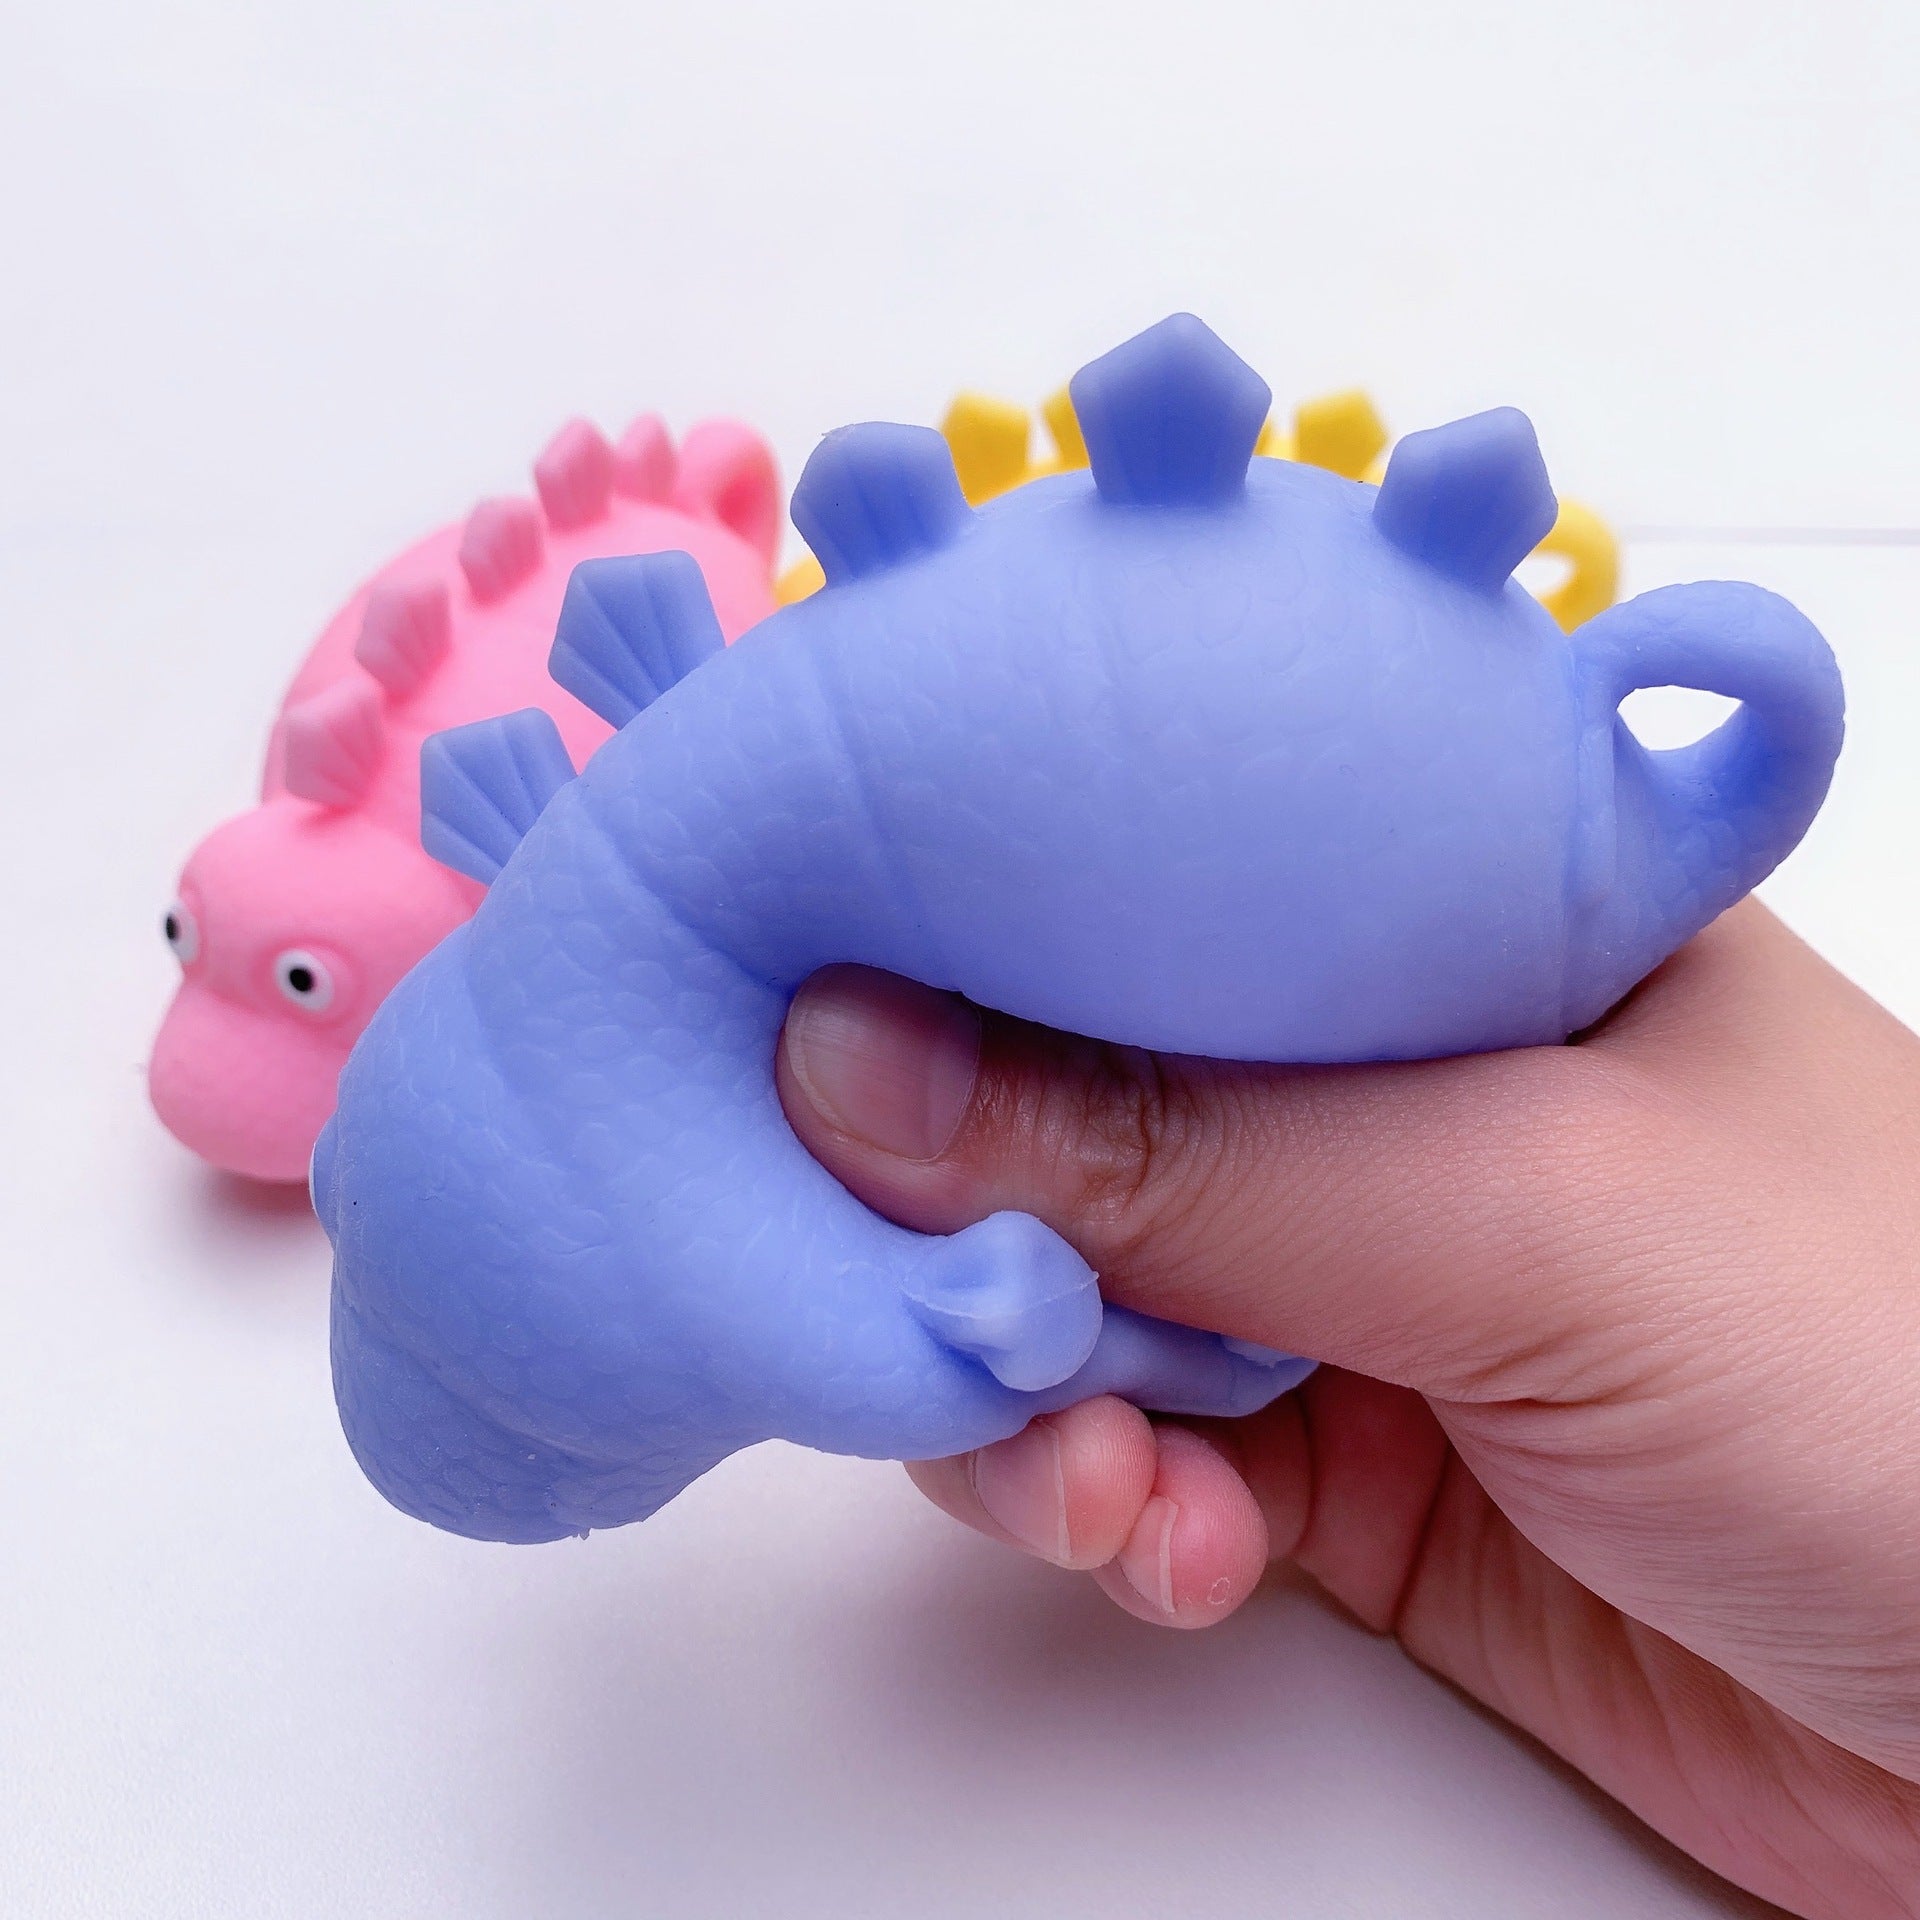 Squishy Dinosaur Toy, Introduce your senses to the delightful Squishy Dinosaur Toy—a multisensory experience that combines tactile pleasure, visual stimulation, and stress-relief, offering a wealth of benefits for users of all ages. 🦕 Squishy Dinosaur Toy Features: Squishy & Squeezy: Easy to squeeze, providing a satisfying sensory experience and stress relief. Tentacle Texture: Soft and tactile tentacles across its body make it pleasant to stroke and touch, enhancing tactile engagement. Light Up Feature: Eq